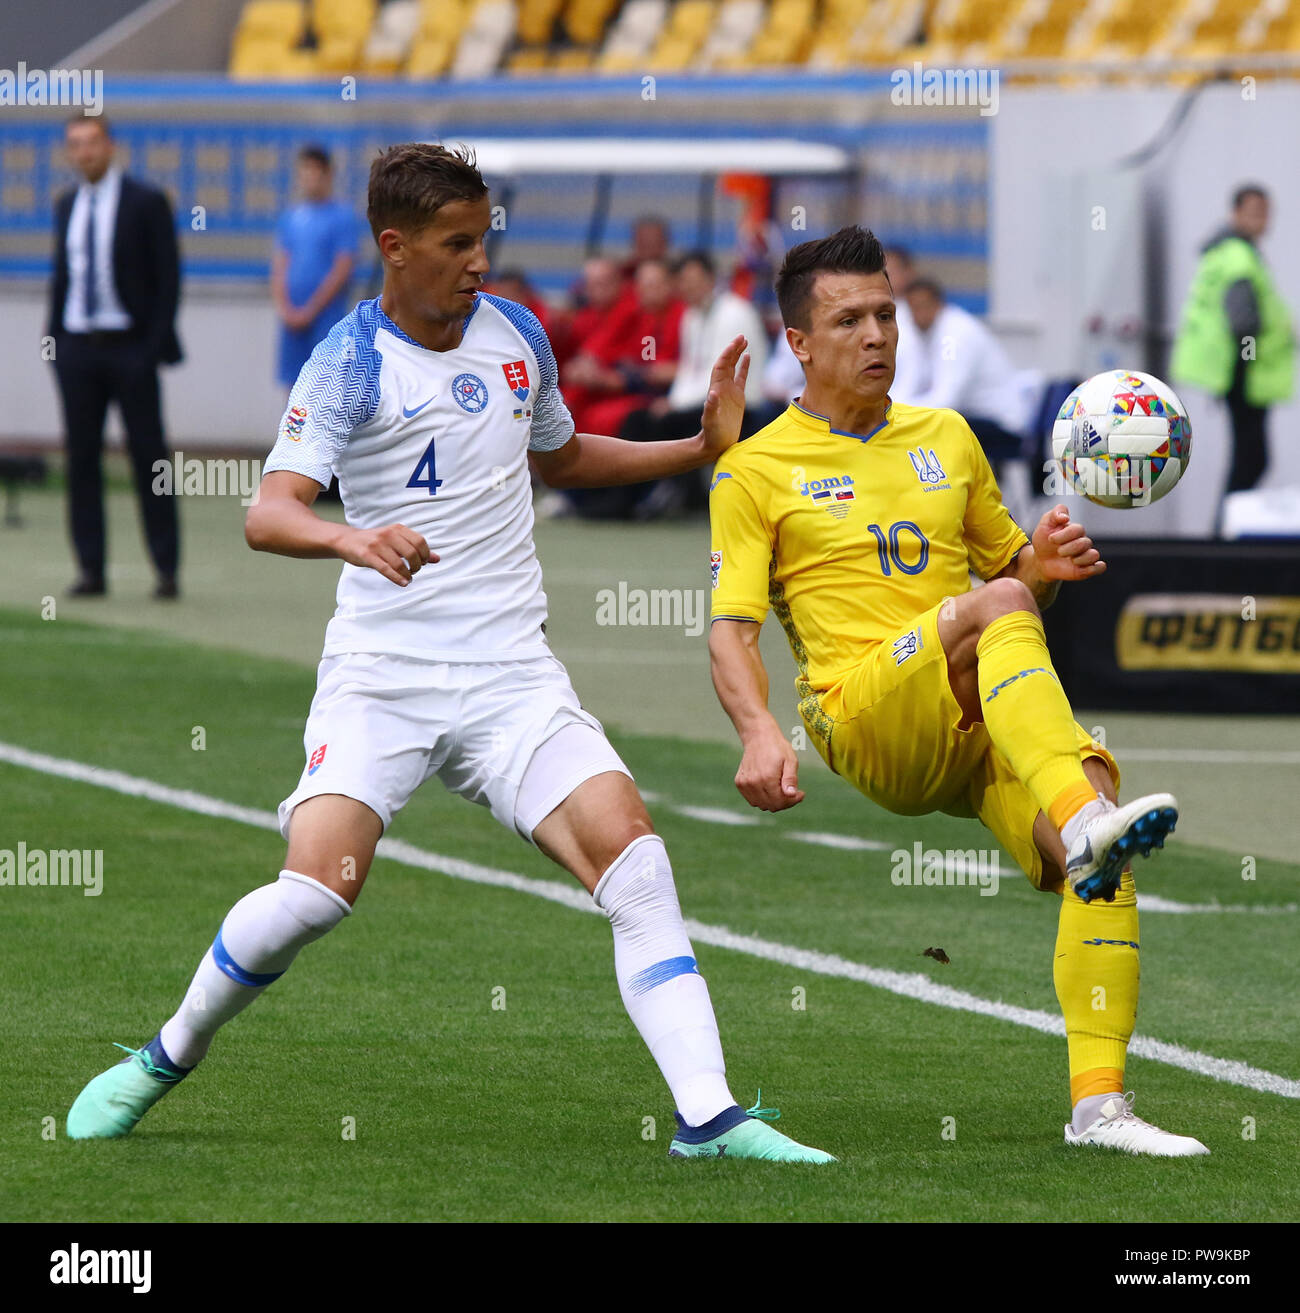 LVIV, UKRAINE - SEPTEMBER 9, 2018: Lubomir Satka of Slovakia (L) fights for a ball with Yevhen Konoplyanka of Ukraine during their UEFA Nations League Stock Photo